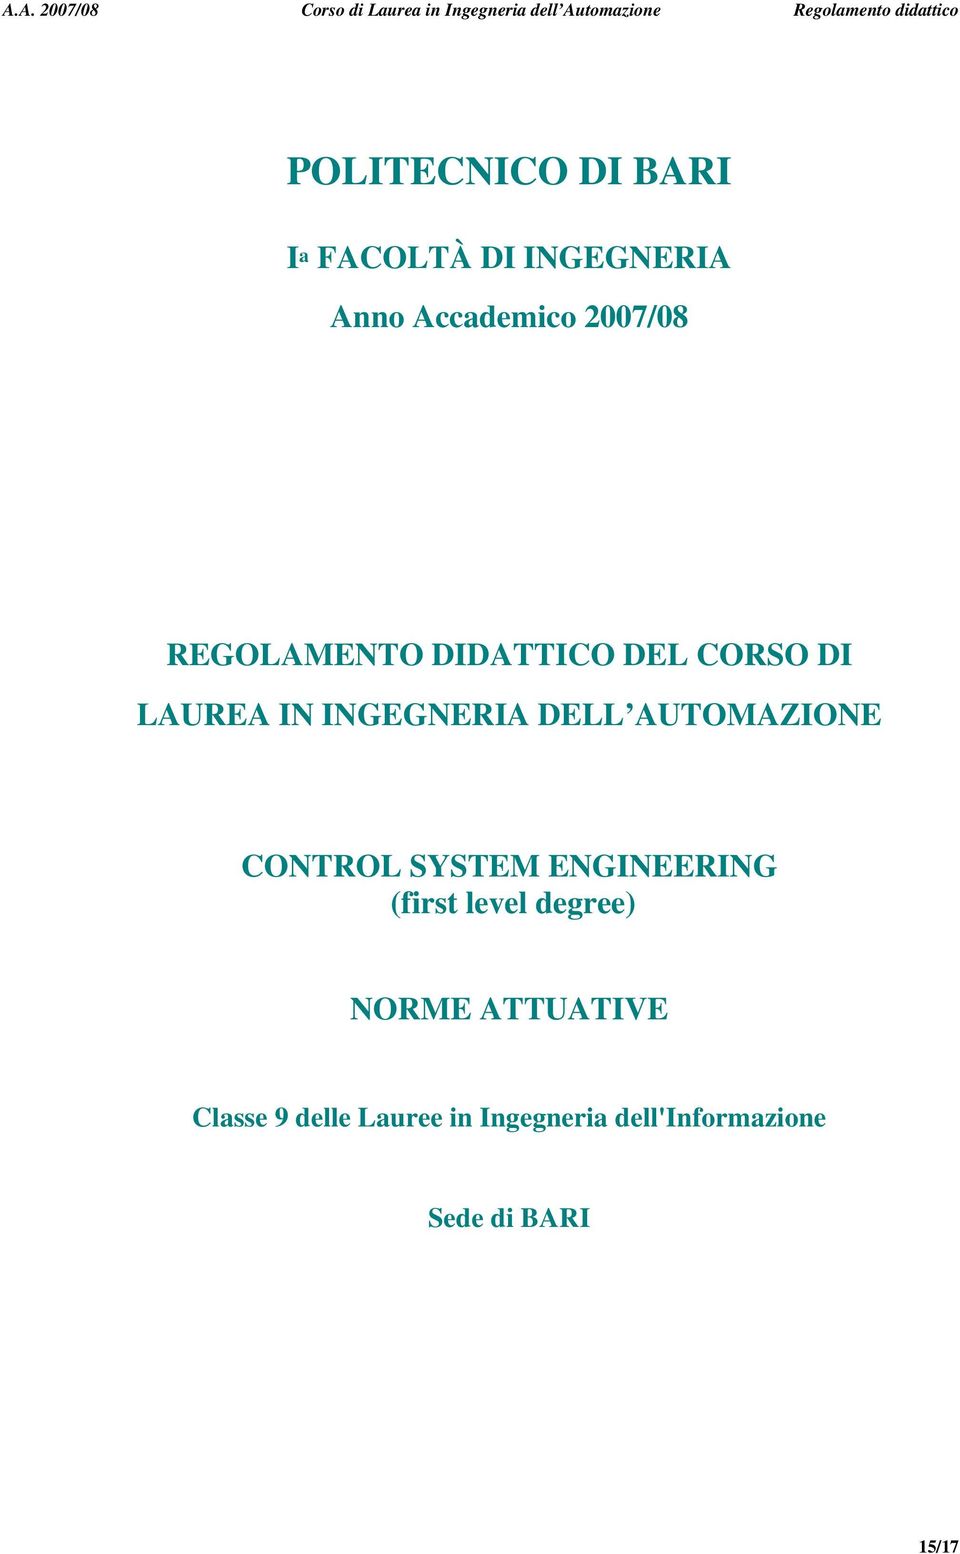 AUTOMAZIONE CONTROL SYSTEM ENGINEERING (first level degree) NORME